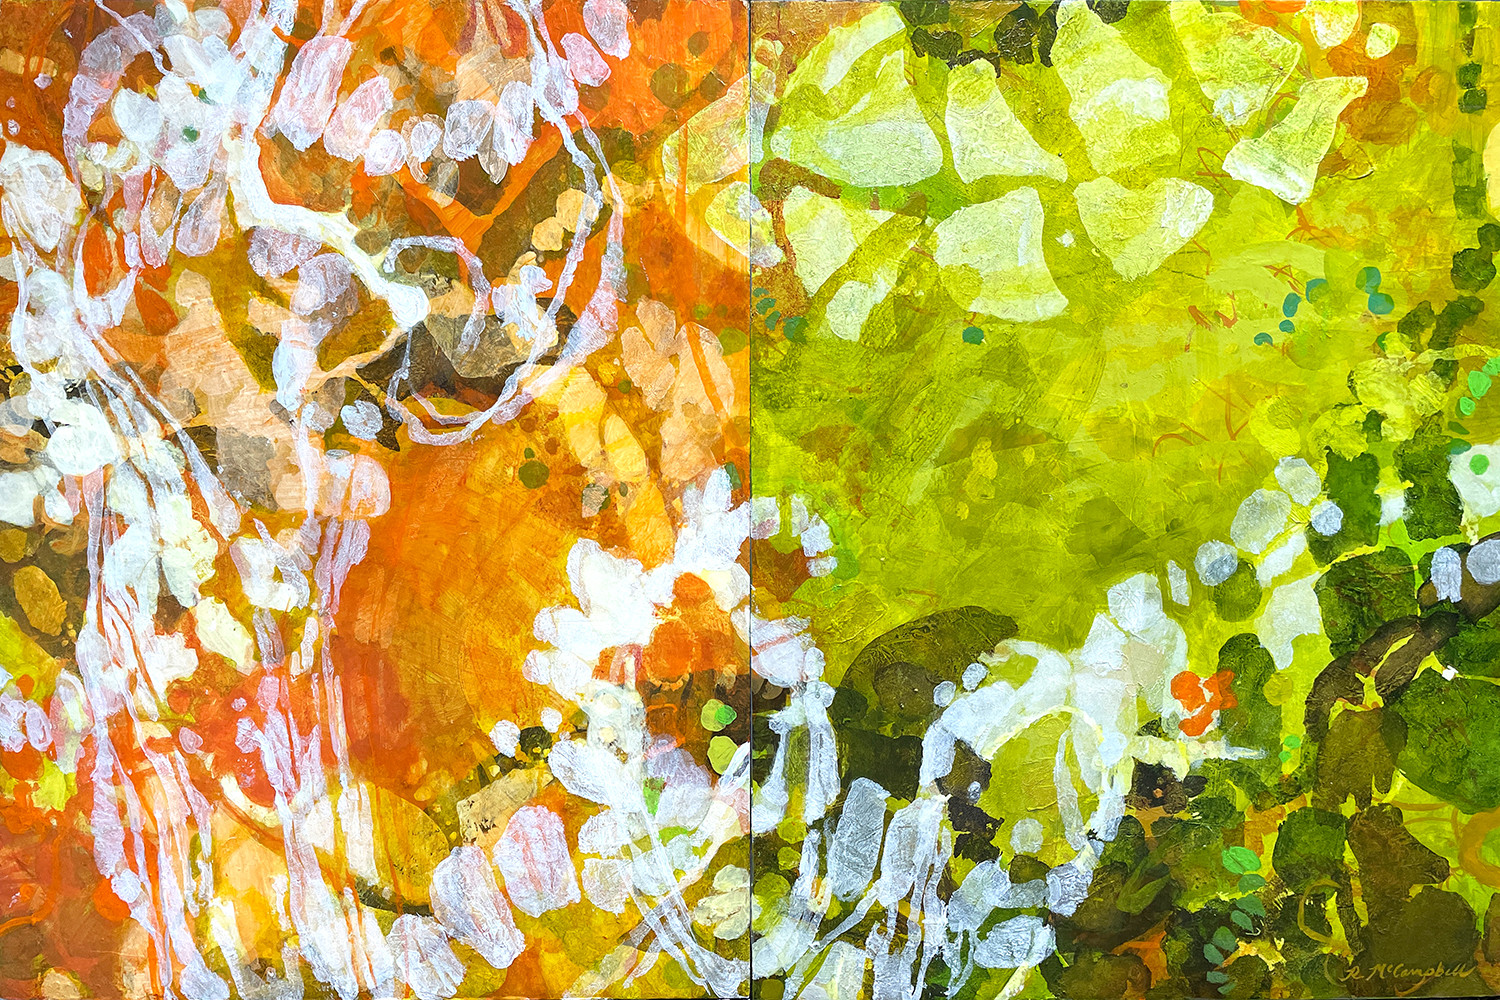 Midsummer's Dream, 24 x 36" w, acrylic and encaustic wax on panels, diptych, by Rachael McCampbell © 2022